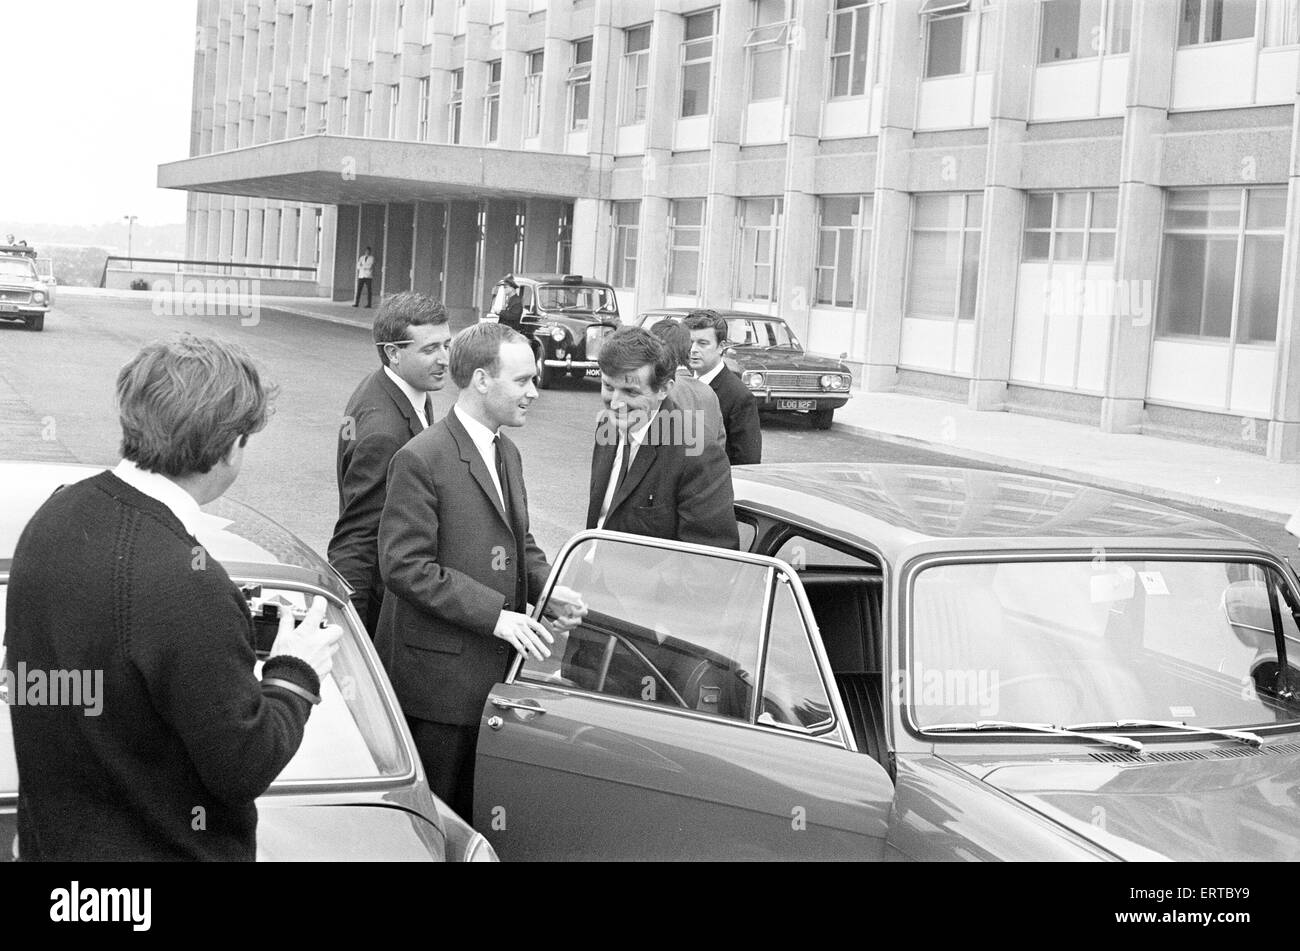 Proud father, Barry Thorns, pictured leaving Birmingham Maternity Hospital, 3rd October 1968. It was reported yesterday, that Sheila Thorns from Birmingham underwent a Caesarean section early this morning during which six children - four boys and two girls - were delivered. In what was been hailed as the first recorded case of live sextuplets in Britain. All the babies were placed in incubators after being delivered. Twenty eight medical staff from Birmingham Maternity Hospital were present at the delivery. Three of the Thorns sextuplets survived, July, Susan & Roger, and went on to live Stock Photo